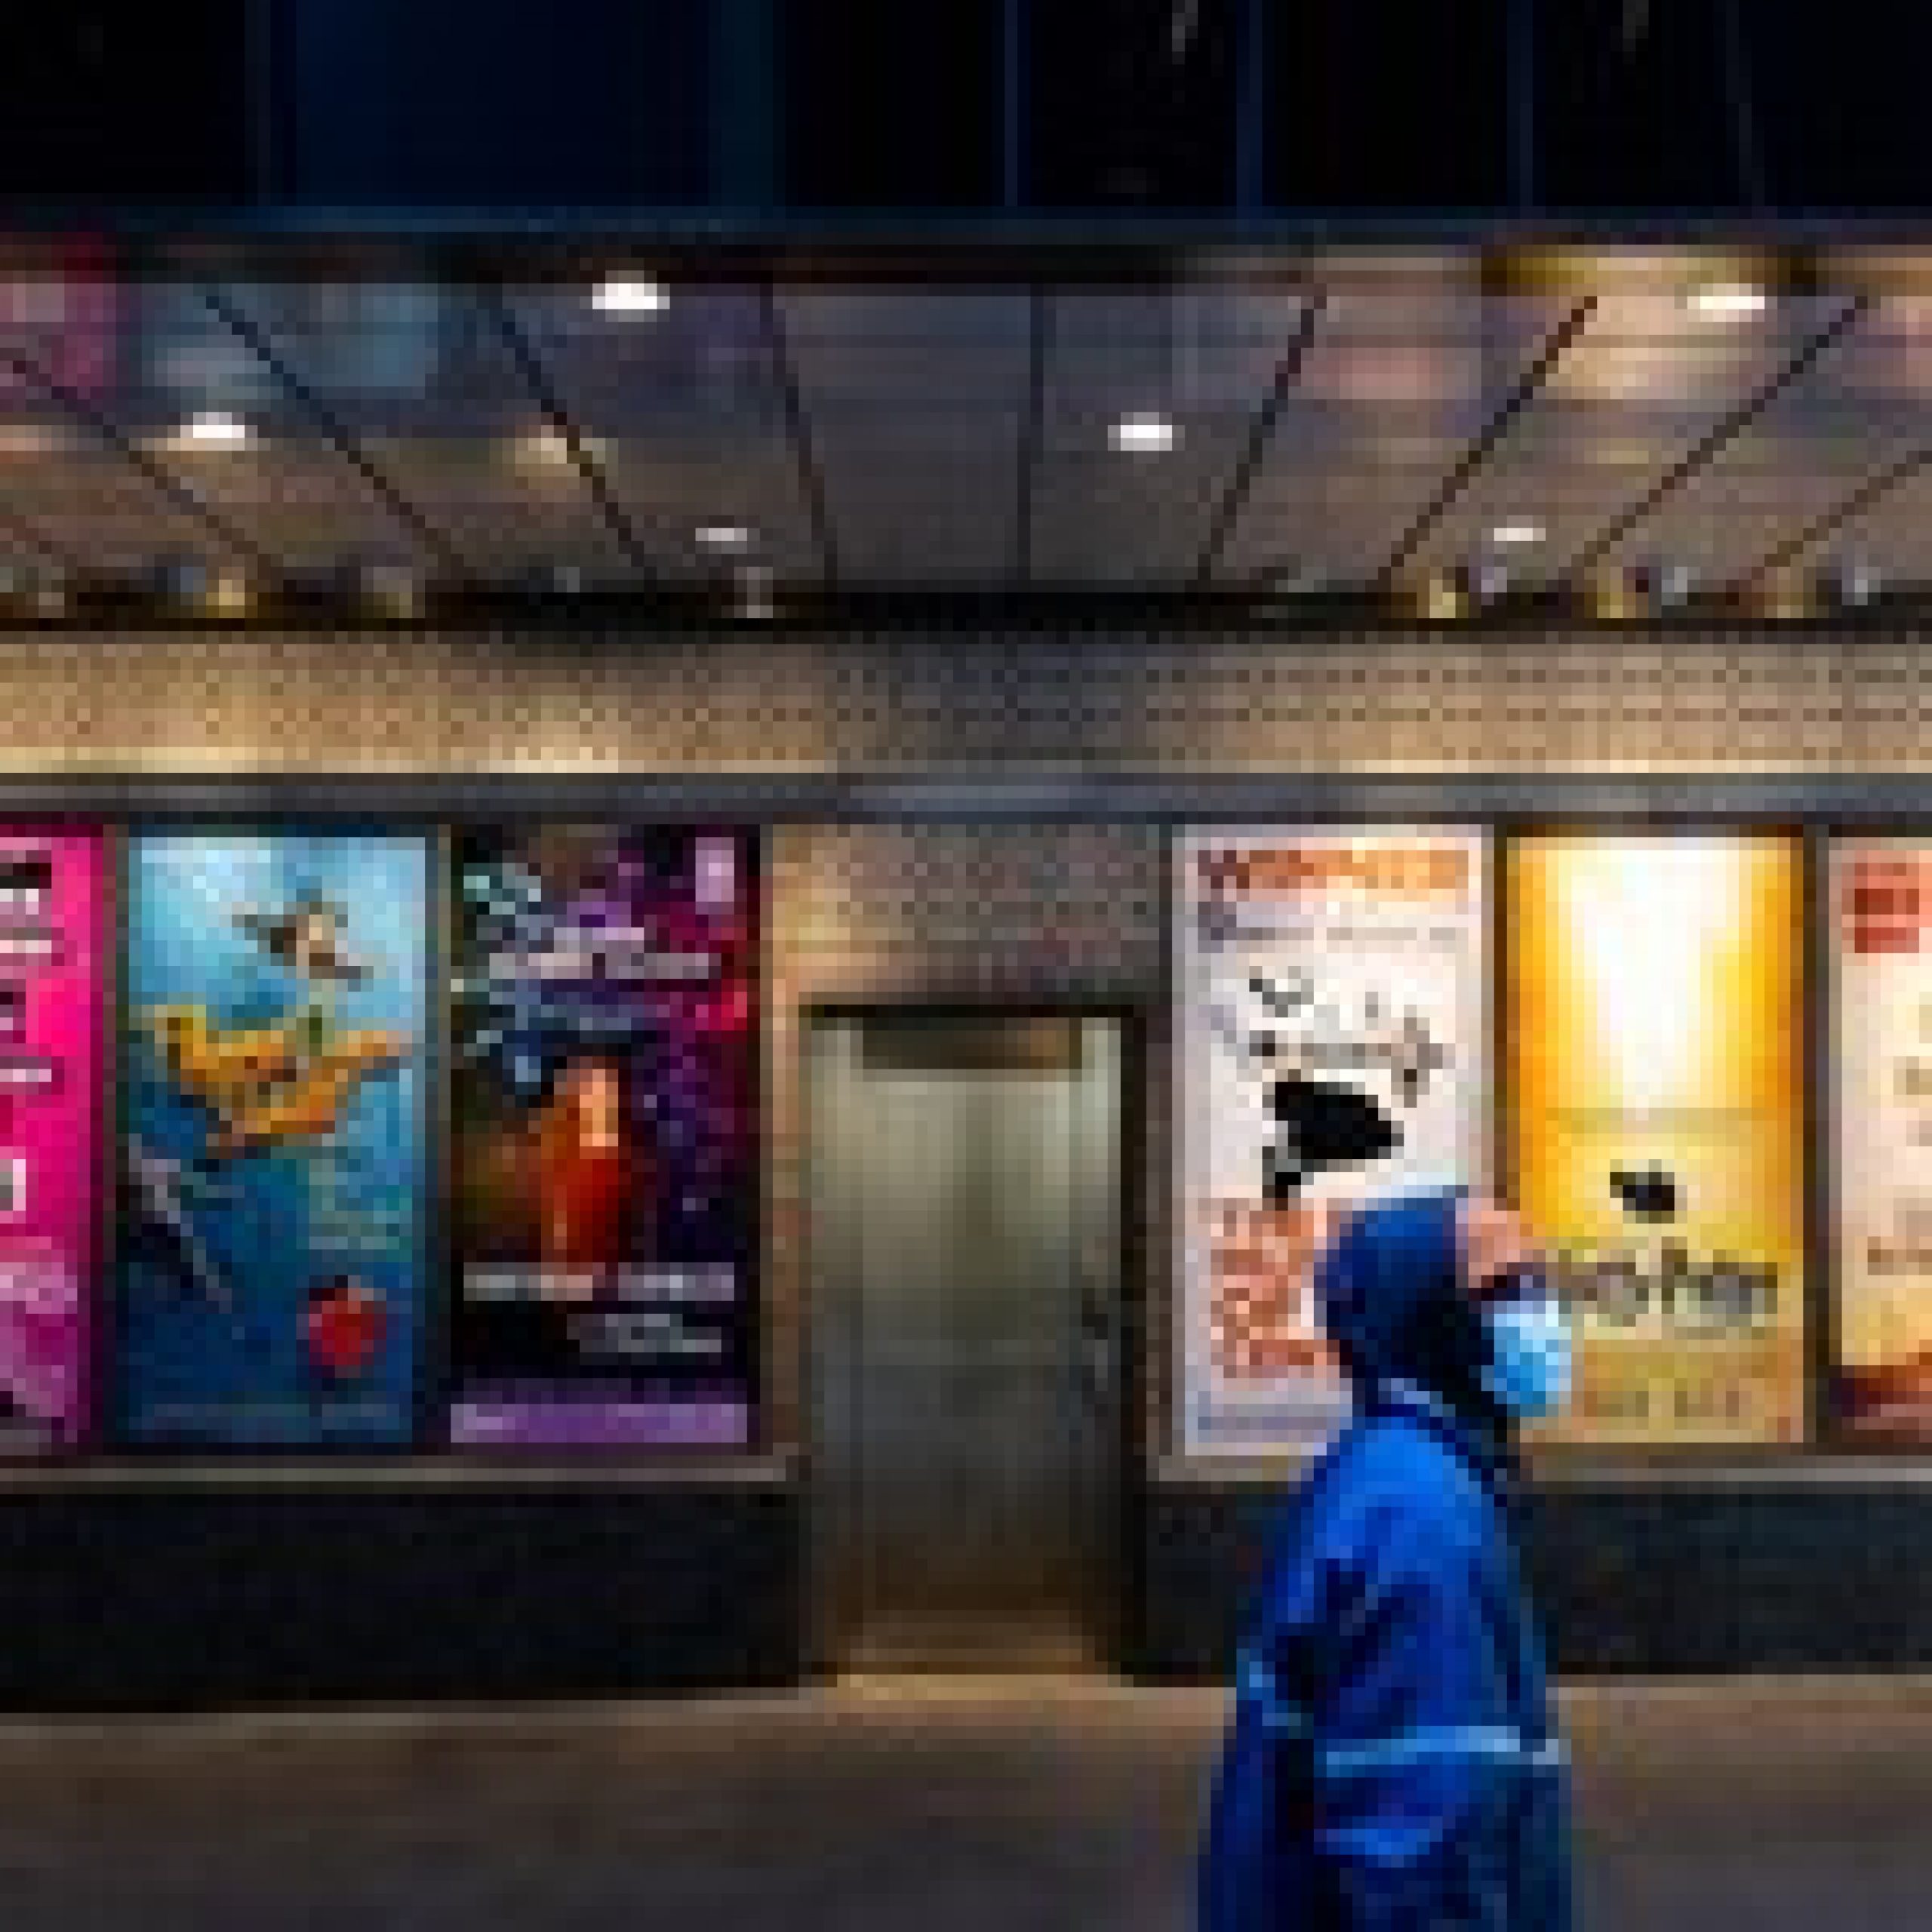 Broadway to Require Vaccinations, Masks for Audience Members